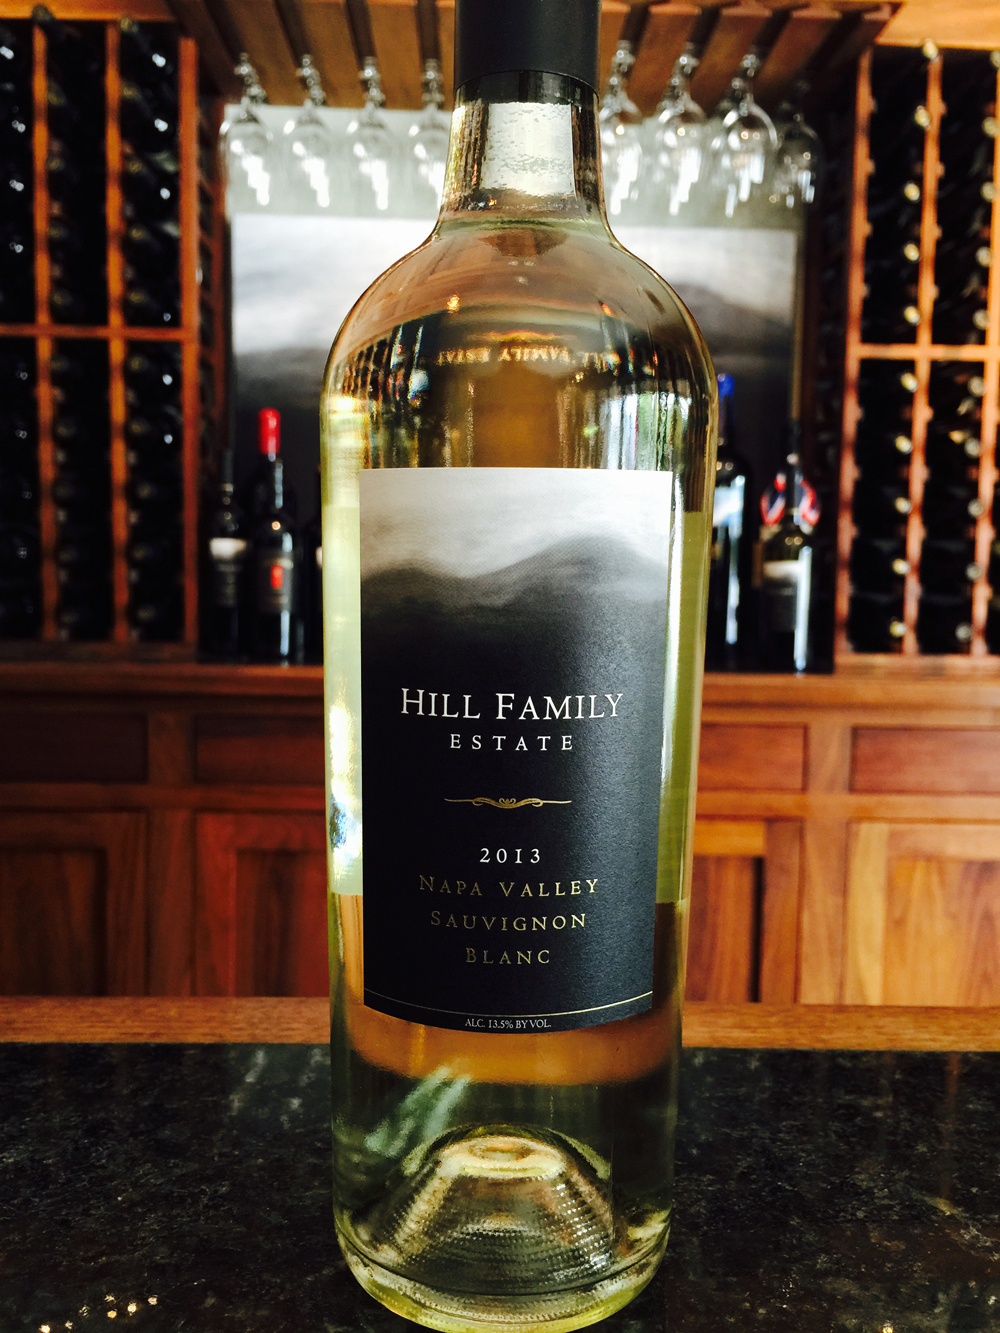 Hill Family Estate - 2013 Napa Valley Sauvignon Blanc (credit: Foodie Chap/Liam Mayclem)